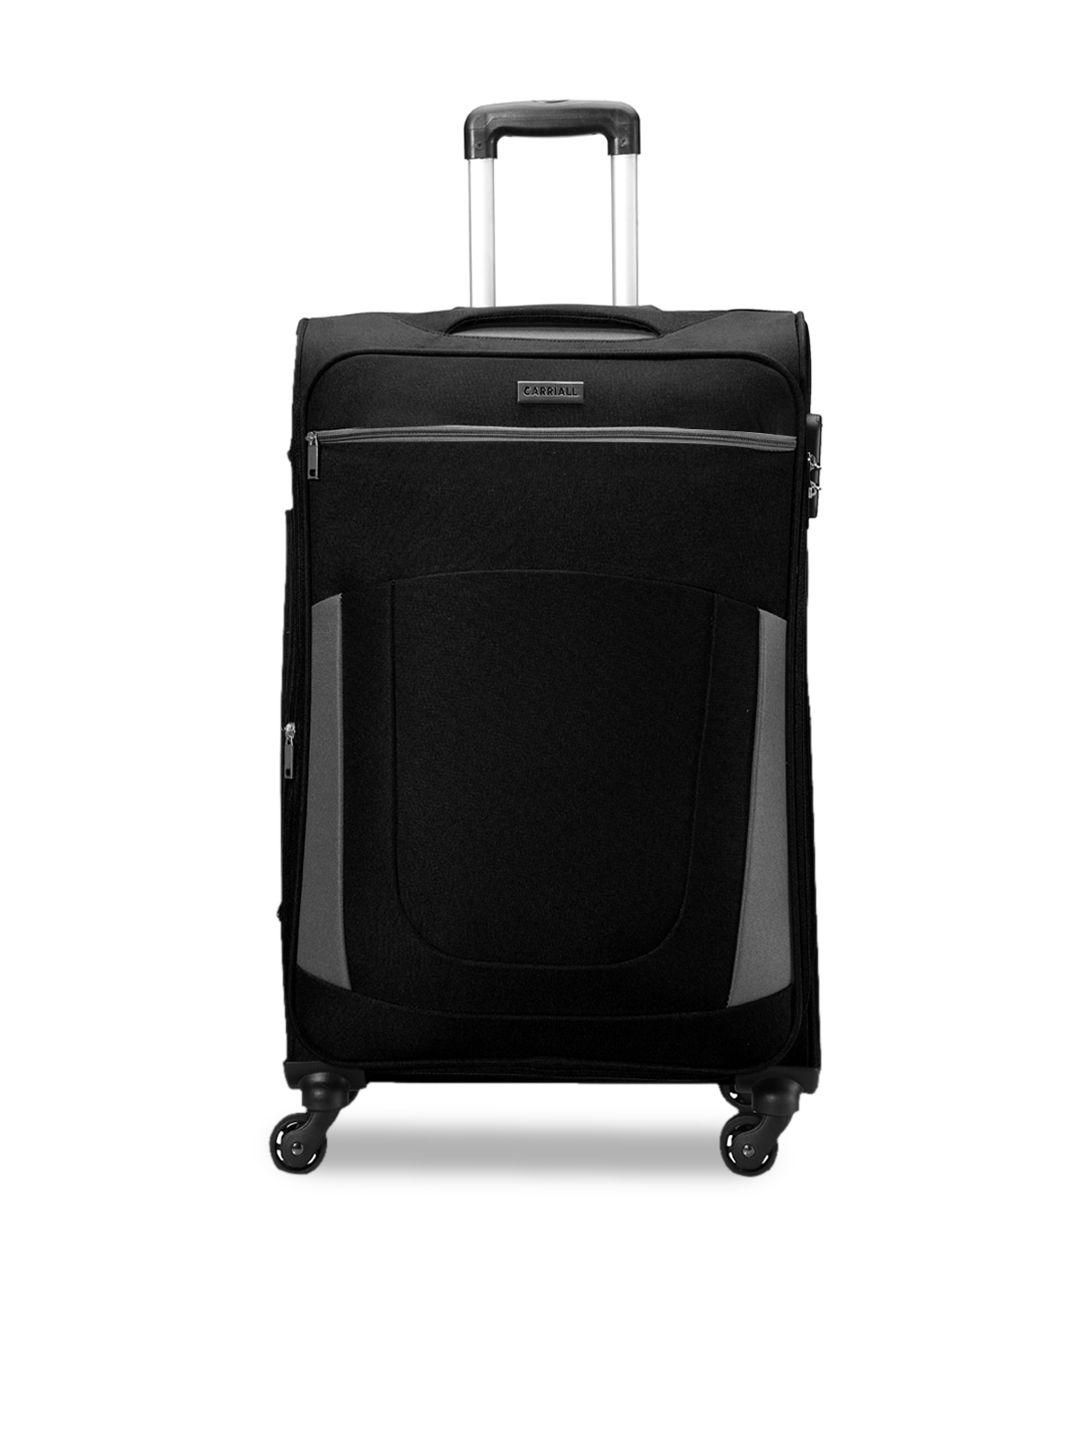 carriall black & grey solid large size check-in luggage